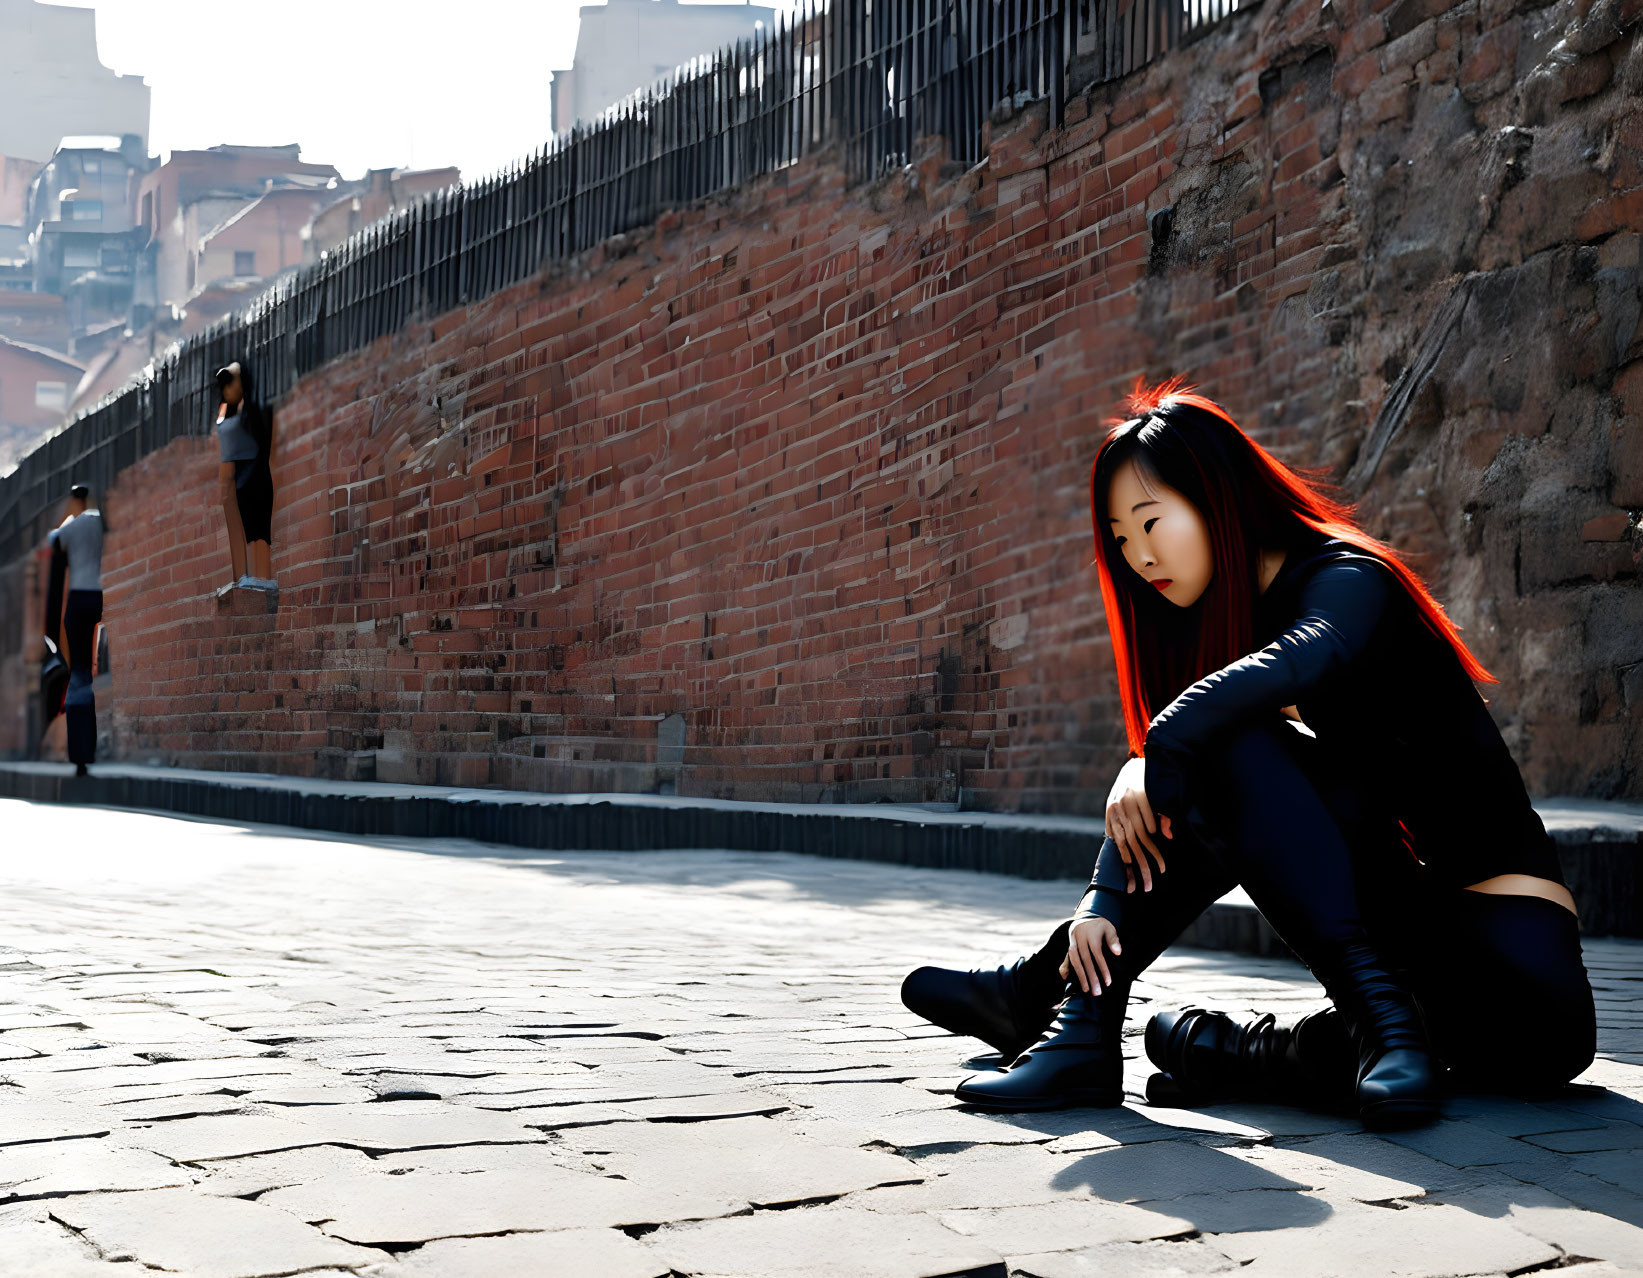 Red-haired person crouching on cobblestone path by brick wall in sunlight